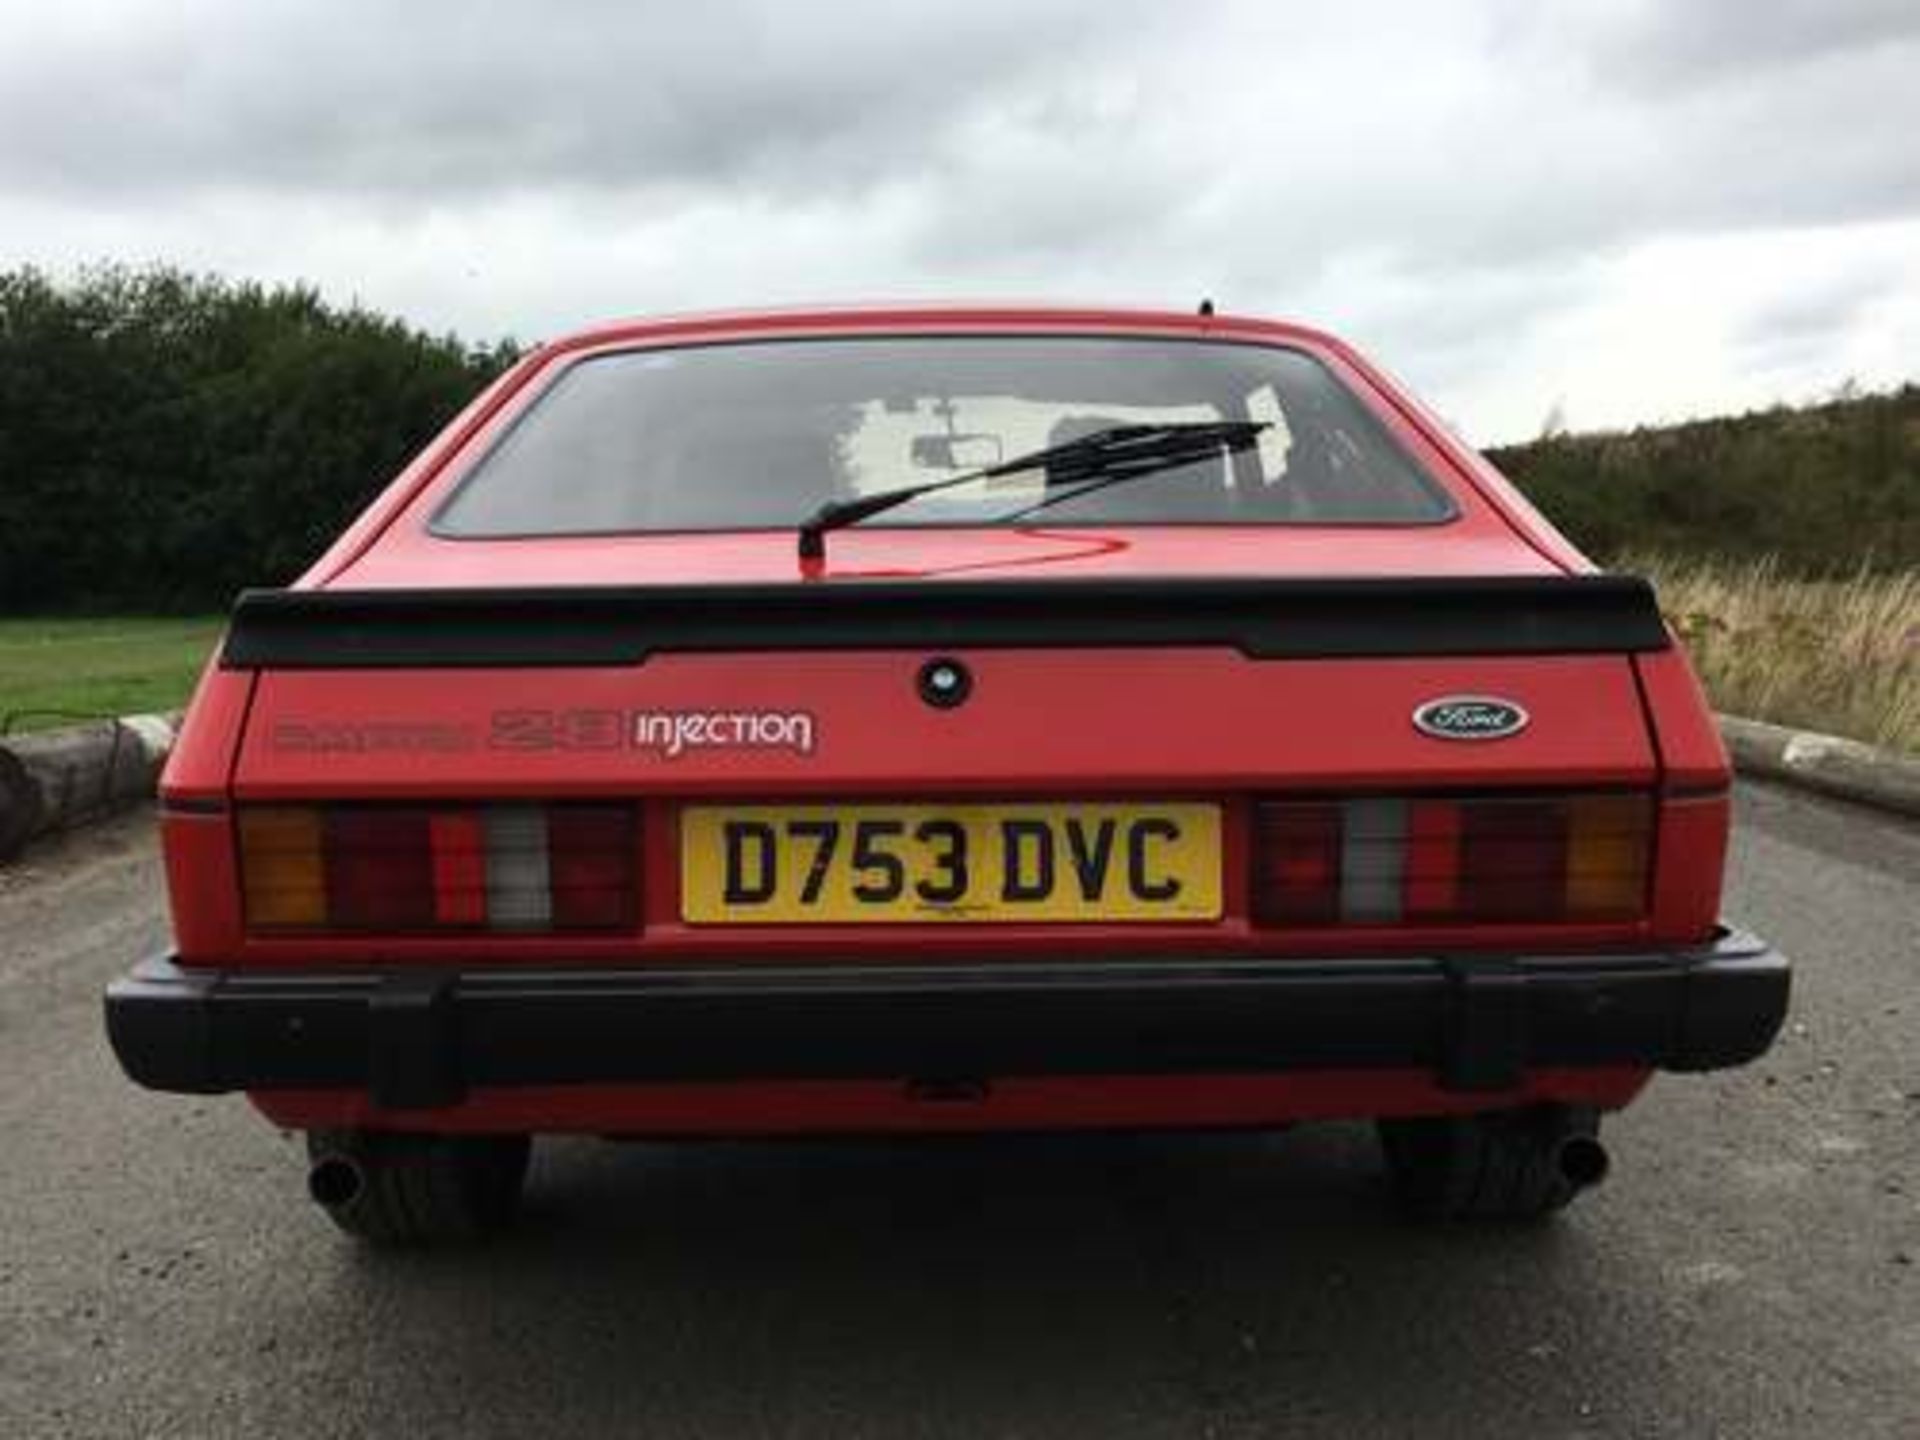 FORD CAPRI INJECTION - 2792cc - Image 8 of 27